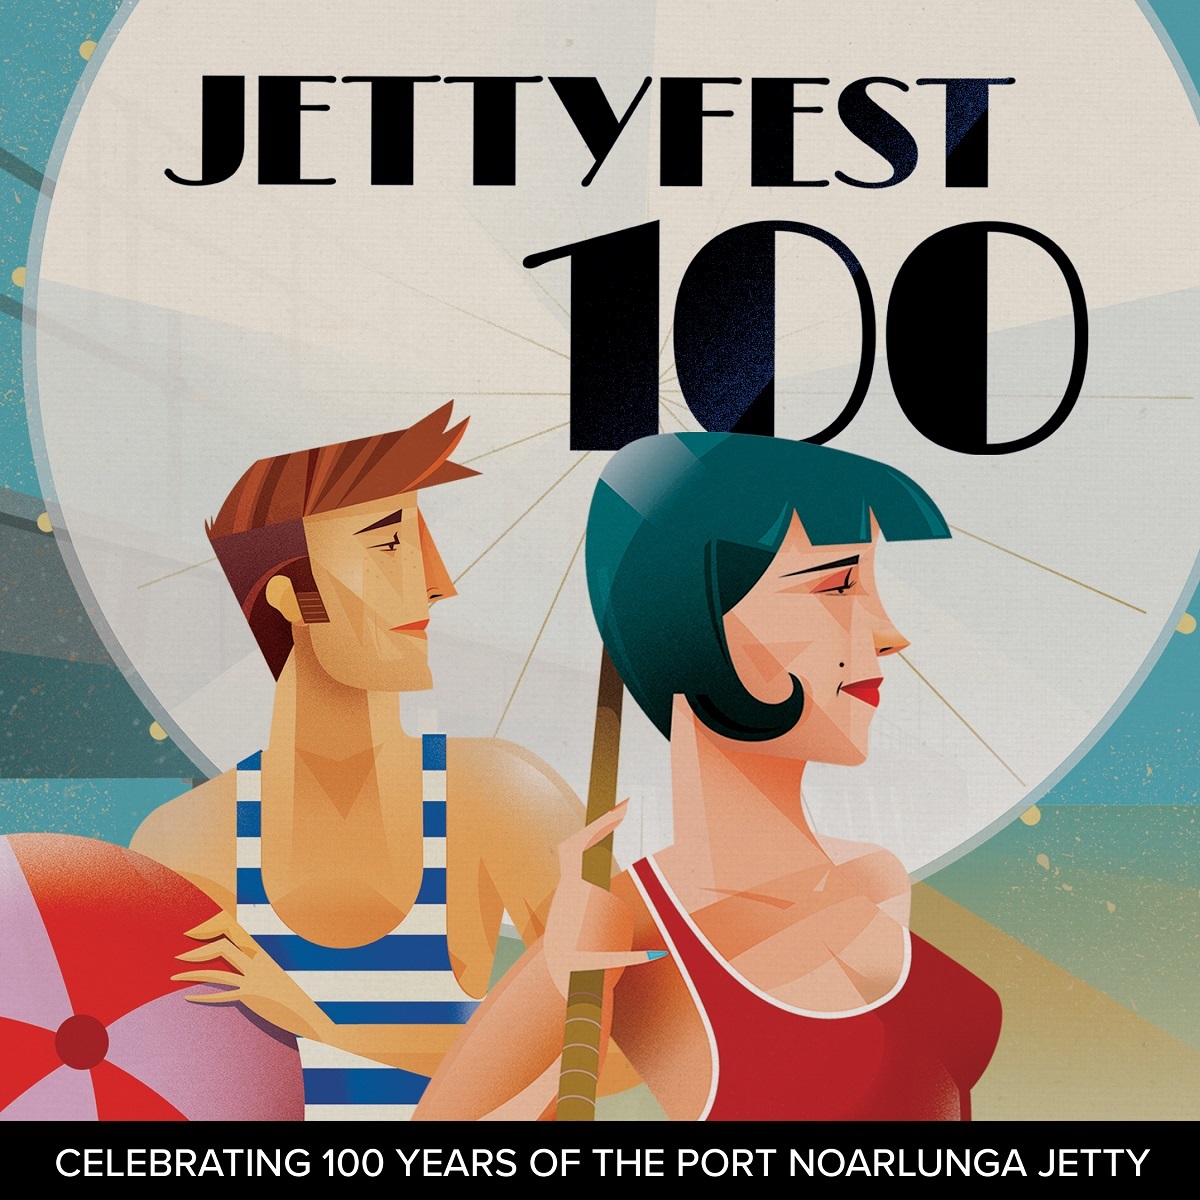 A JettyFest 100 poster featuring an illustrated man and woman alongside the Port Noarlunga jetty with a beach ball and umbrella.